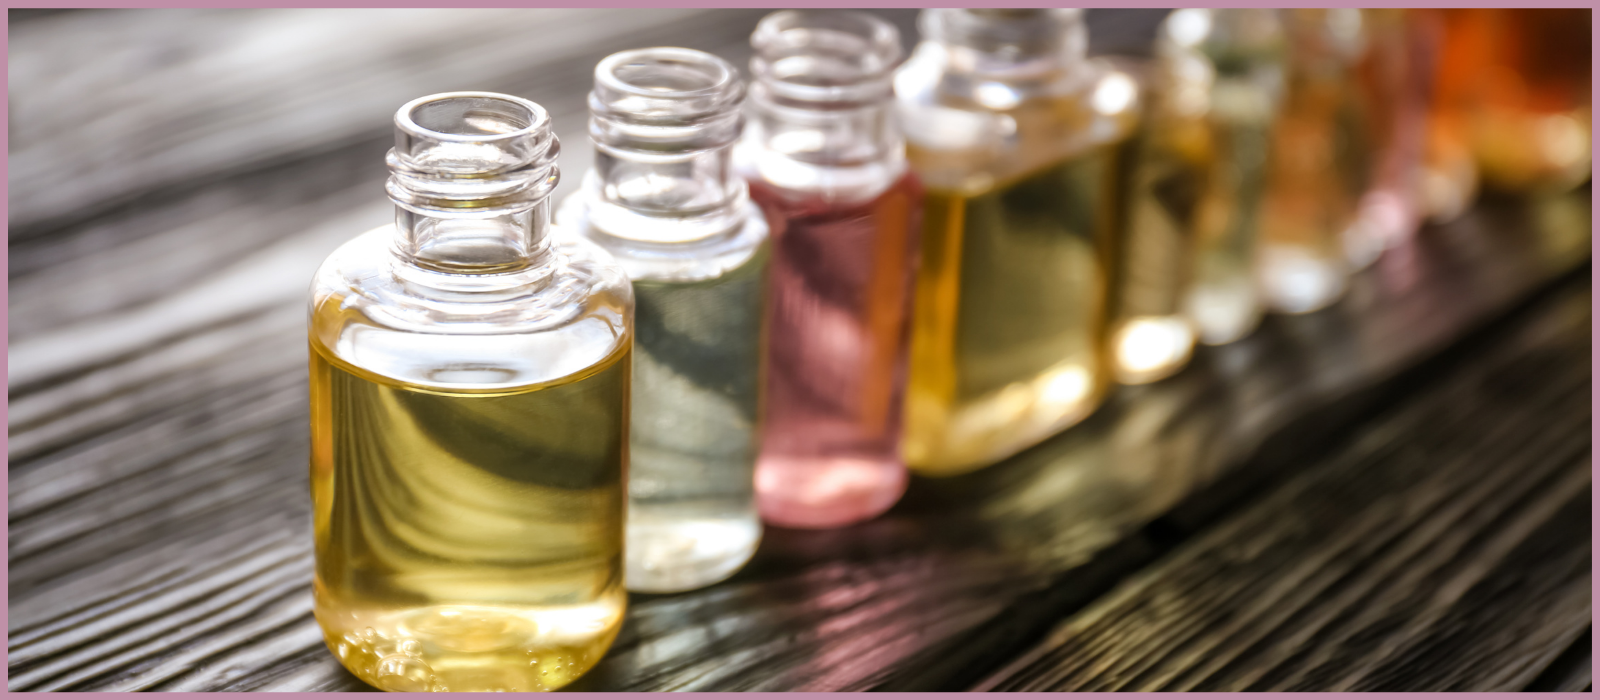 Soap Making: Essential Oils or Fragrance Oils? — The Essential Oil